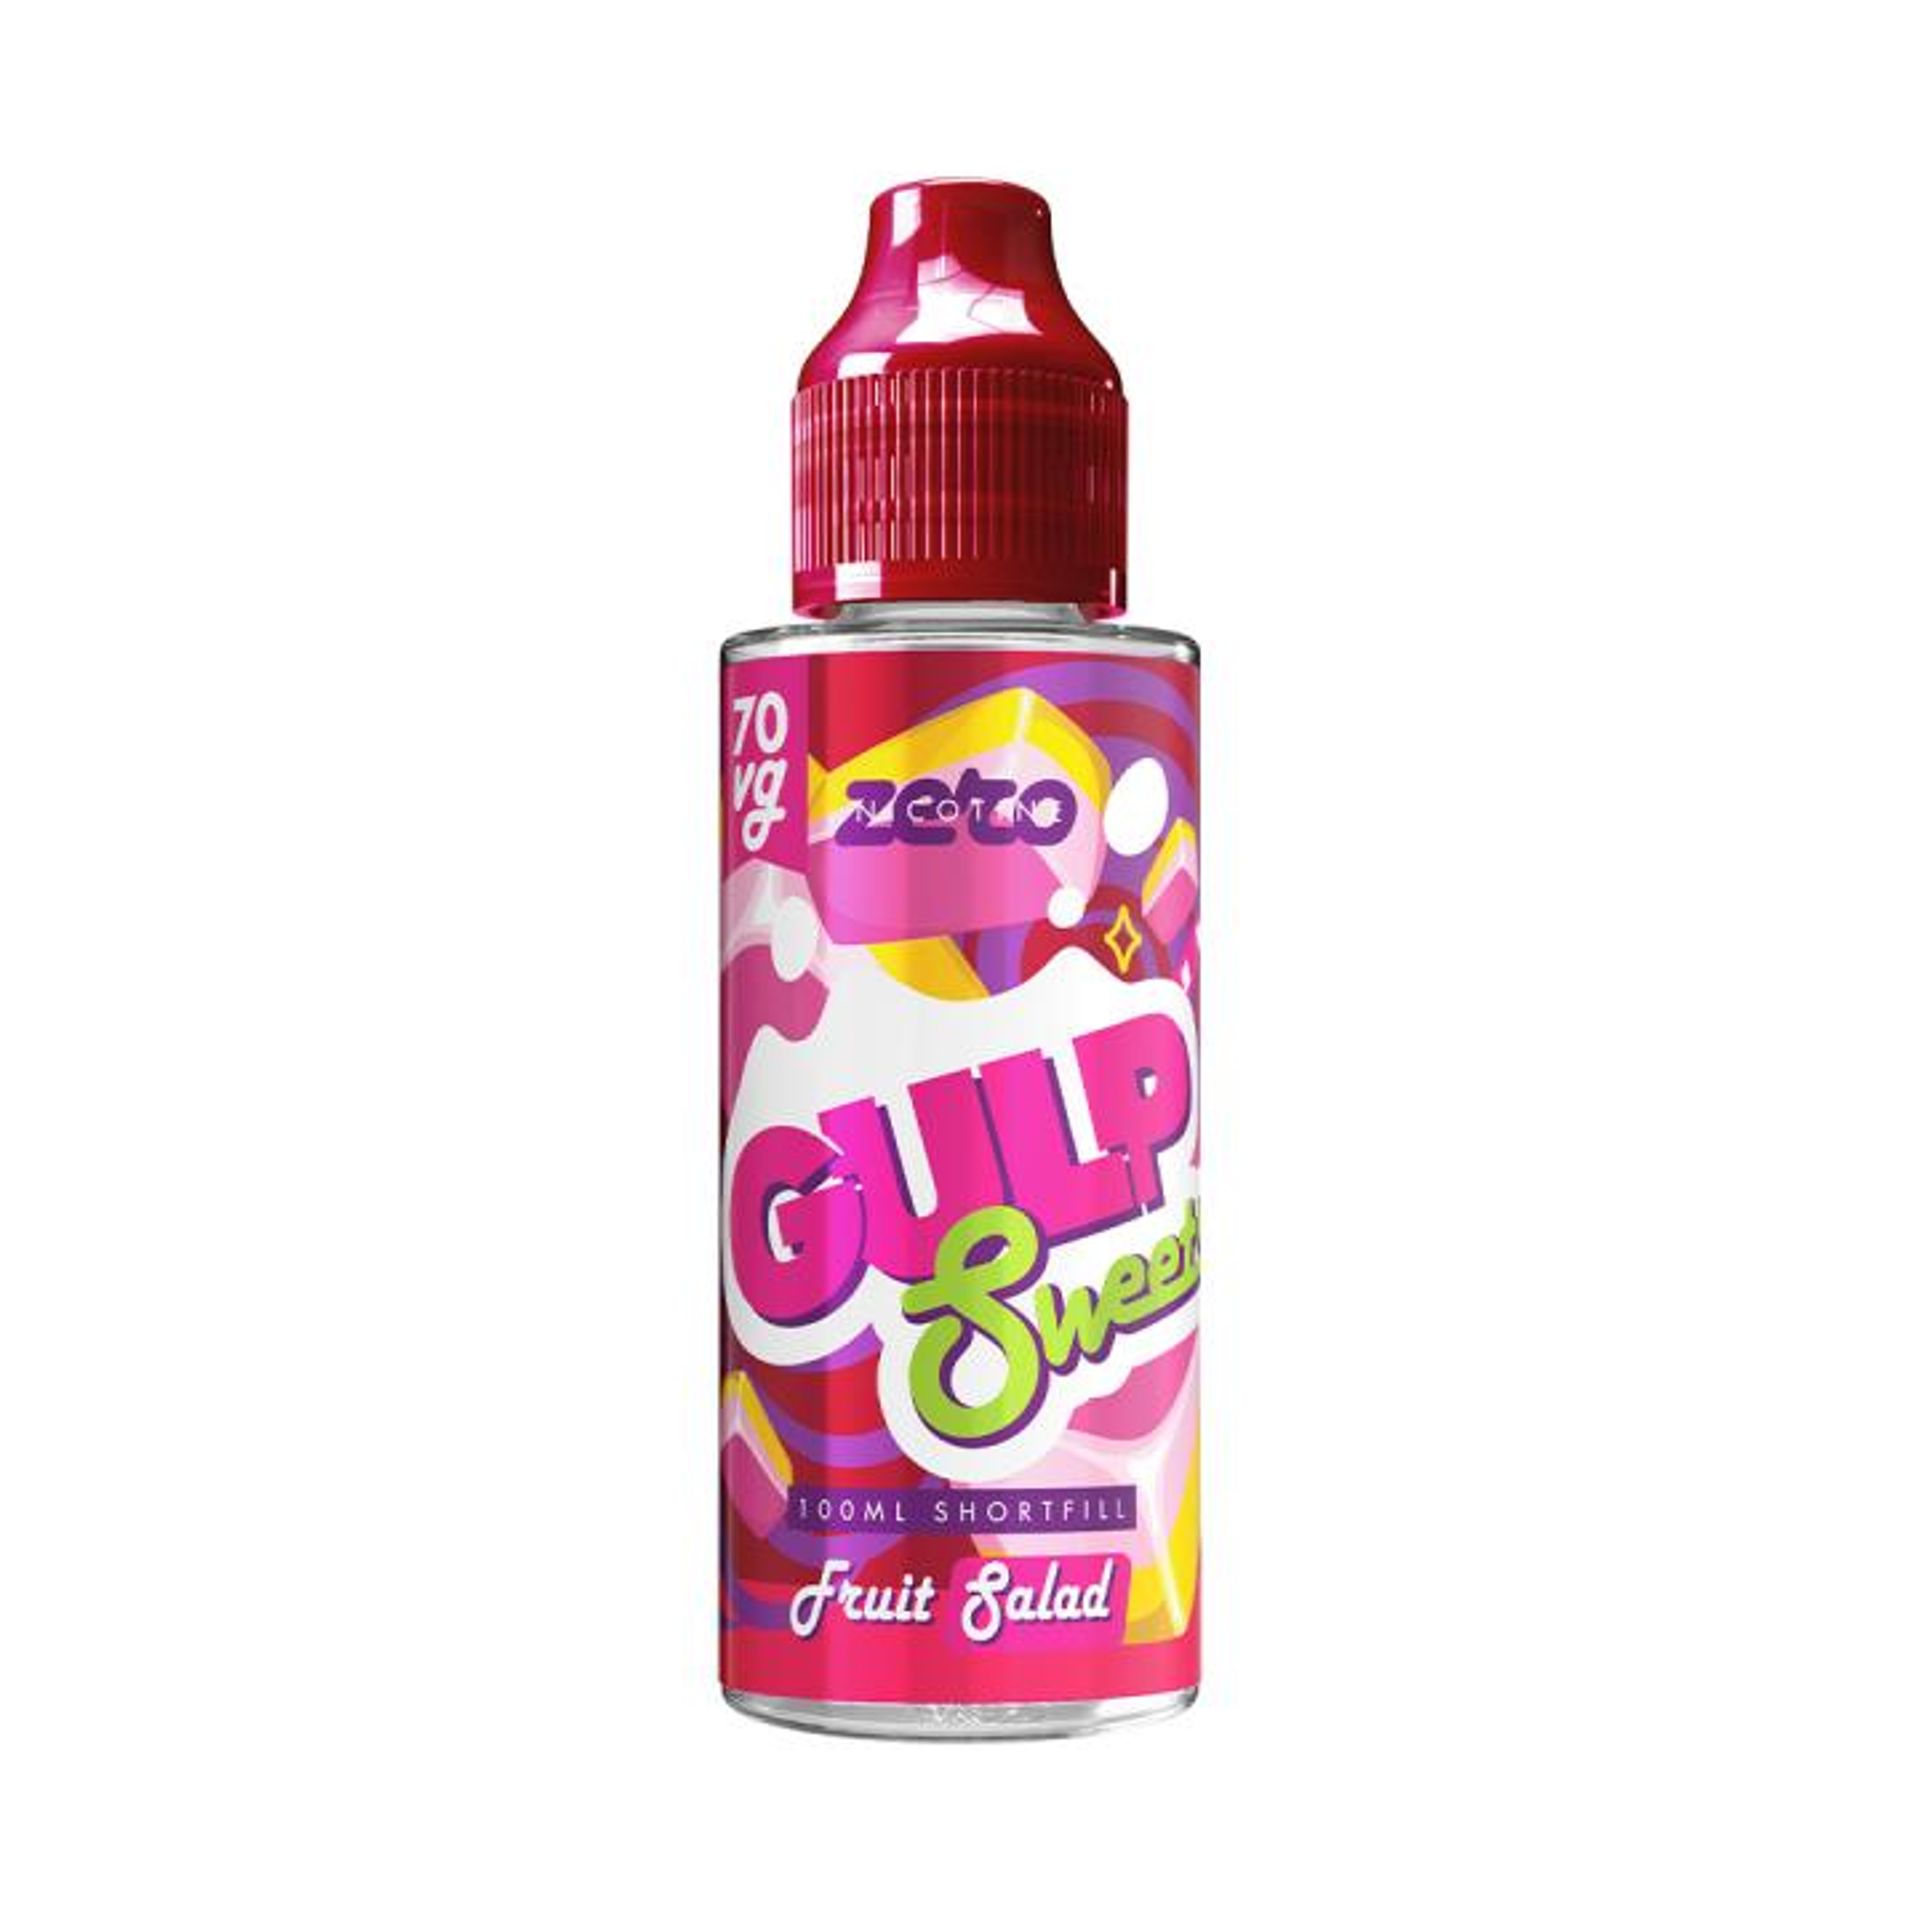 Image of Fruit Salad by Gulp